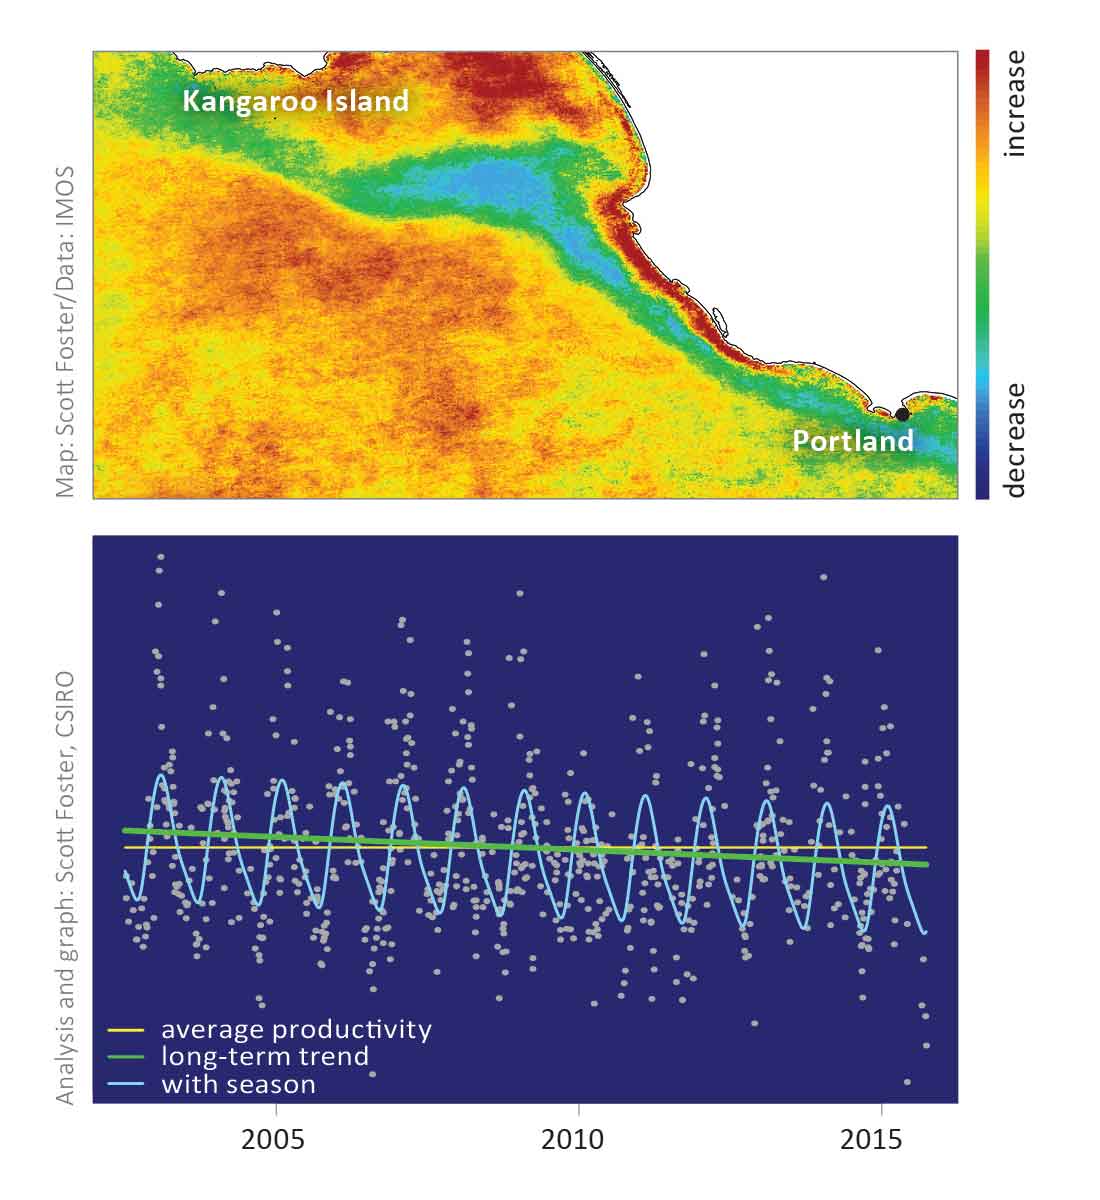 Map showing upwelling regions off South Australia coast and graph showing productiving over time and season (text description above). 